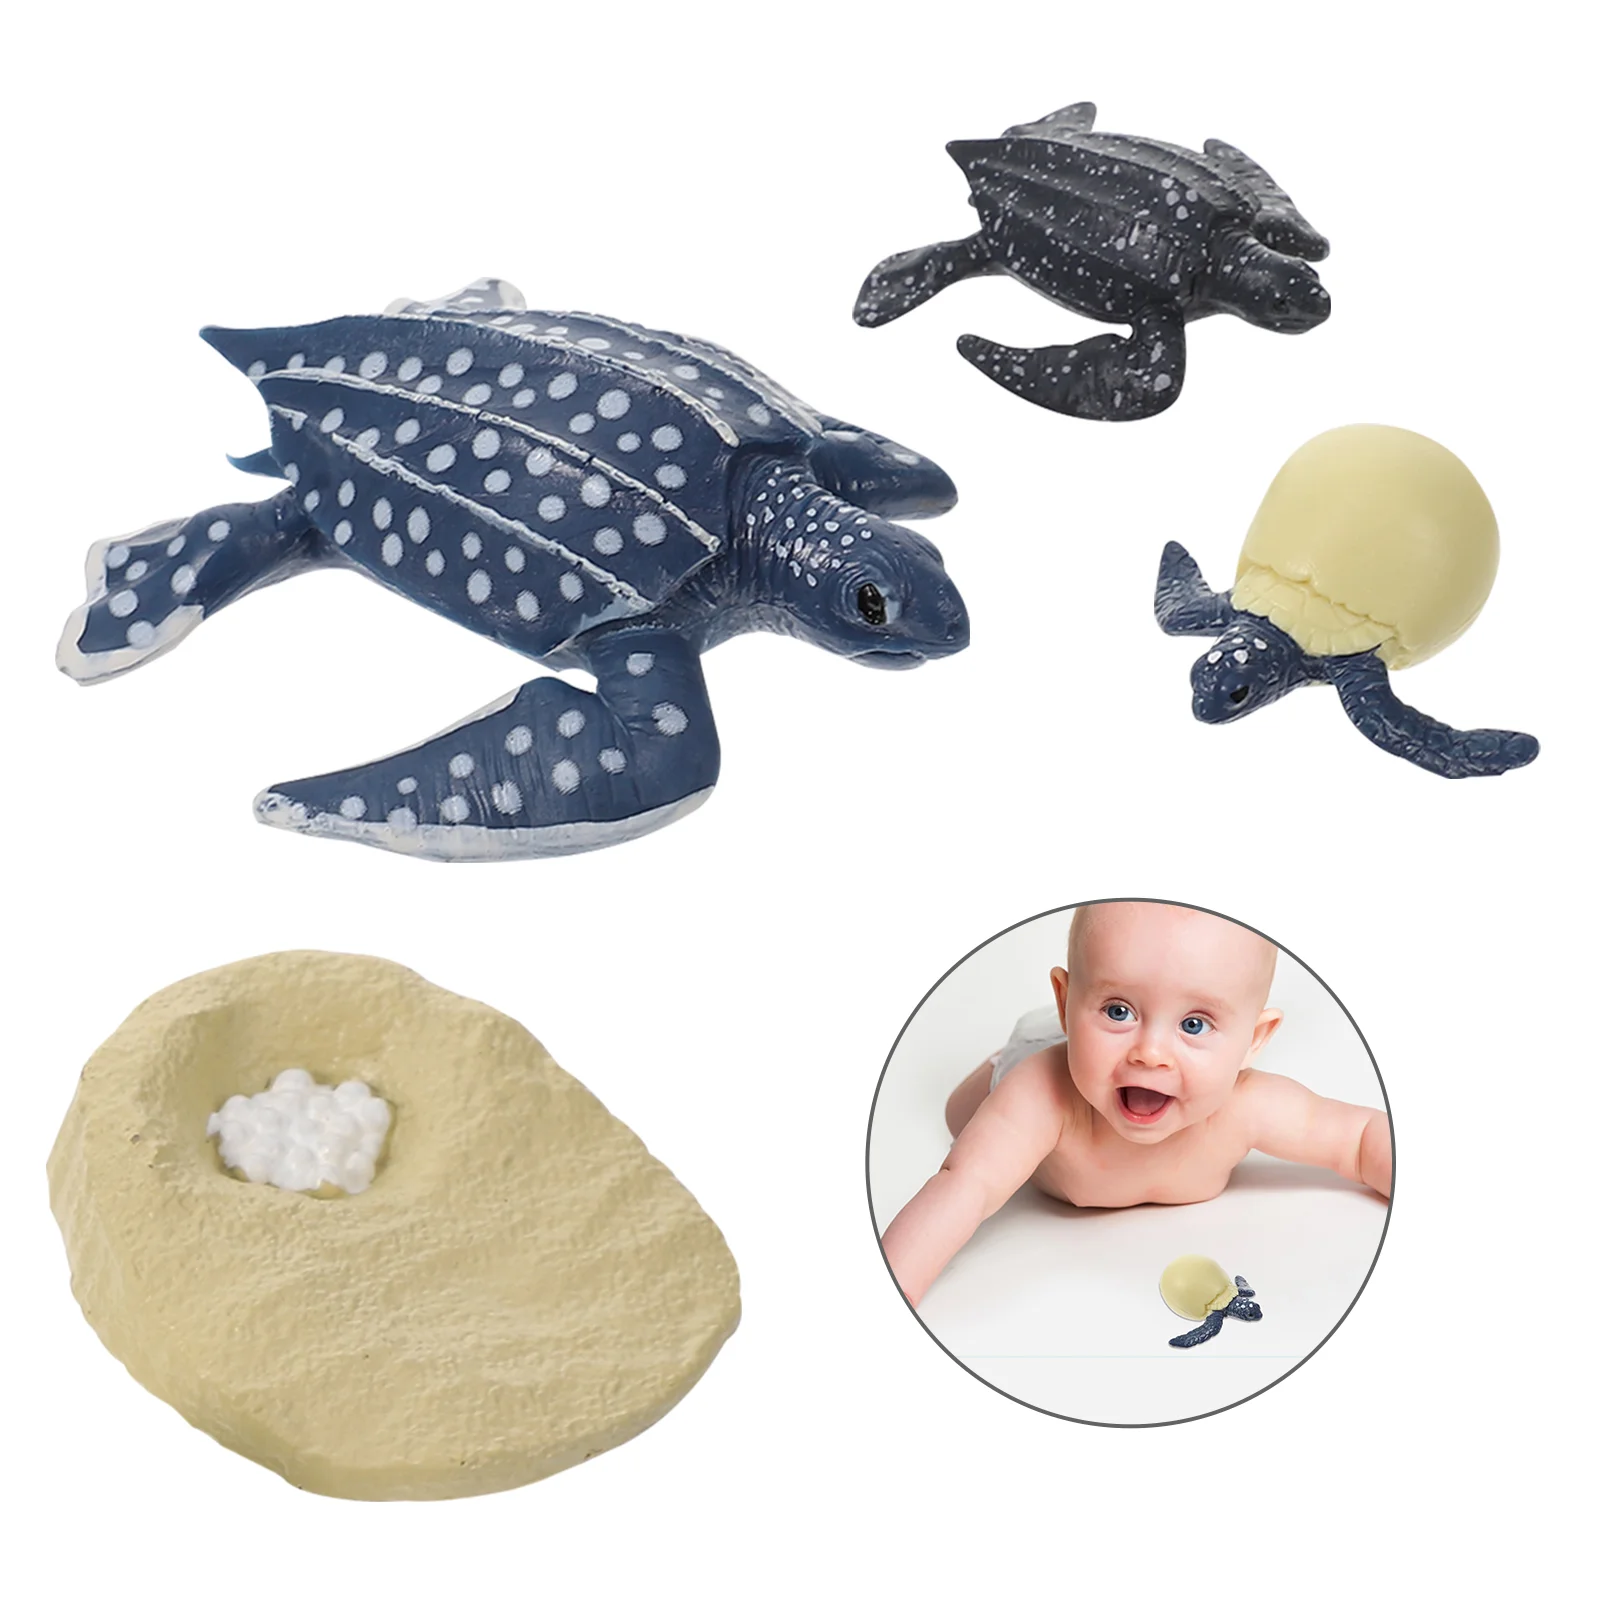 

Toddlers Toys Cognitive Model Life Teaching Aids Early Education Sea ​​turtle Leatherback Growth Cycle Models Animal Stage